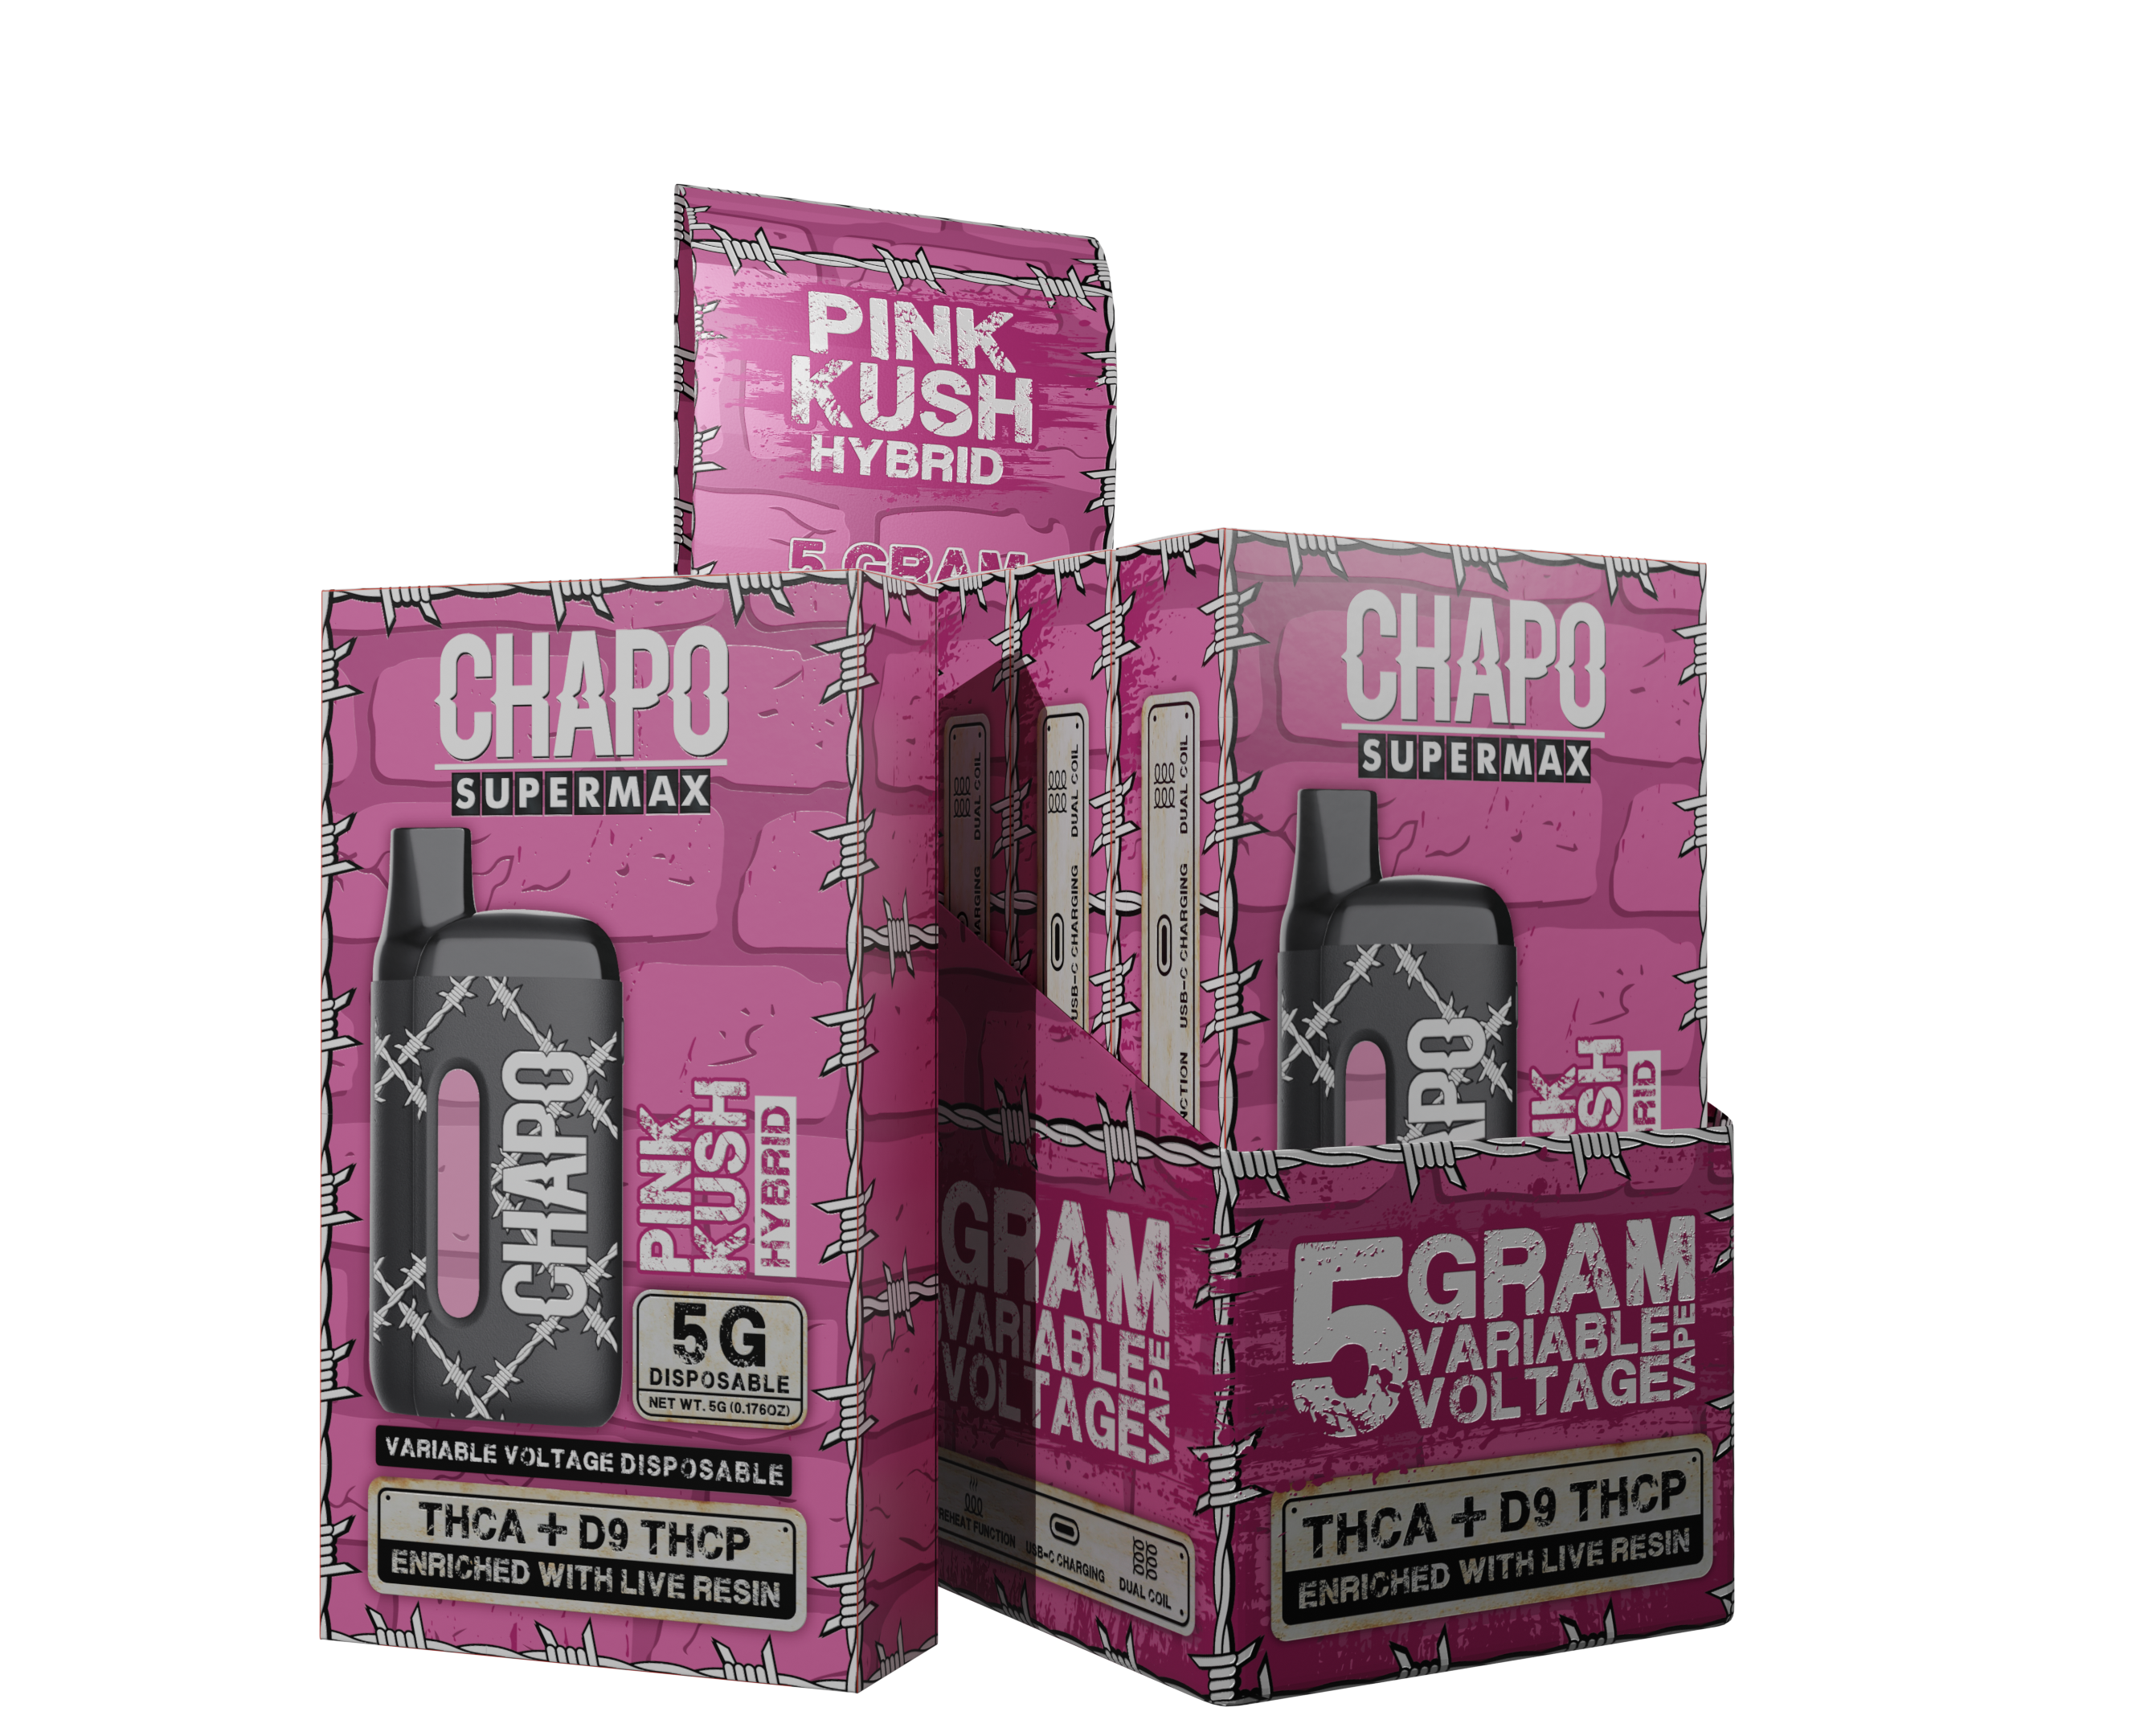 Chapo Supermax THC-A + D9 THC-P Enriched with Live Resin 5g Disposables 6 pack - Vape Masterz